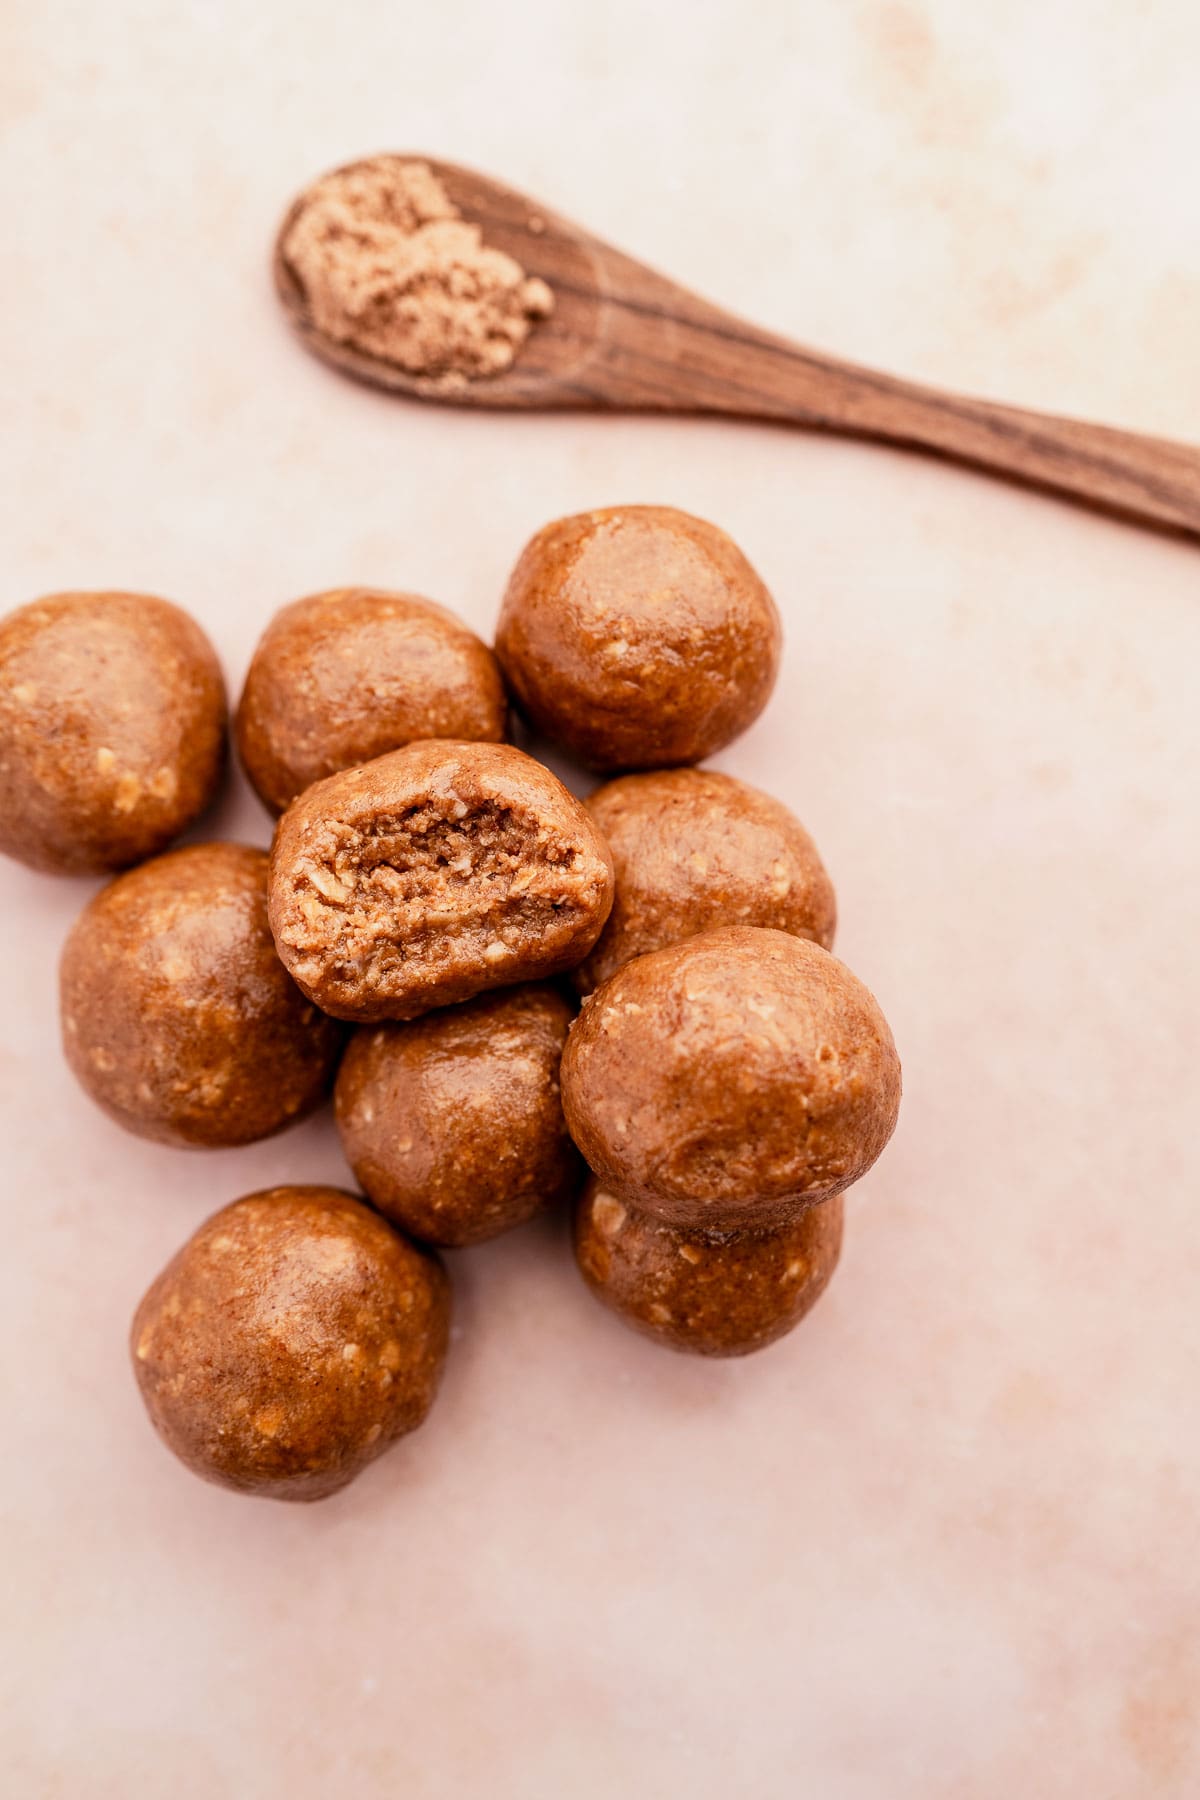 Chai energy bites on a table with a wooden spoon.